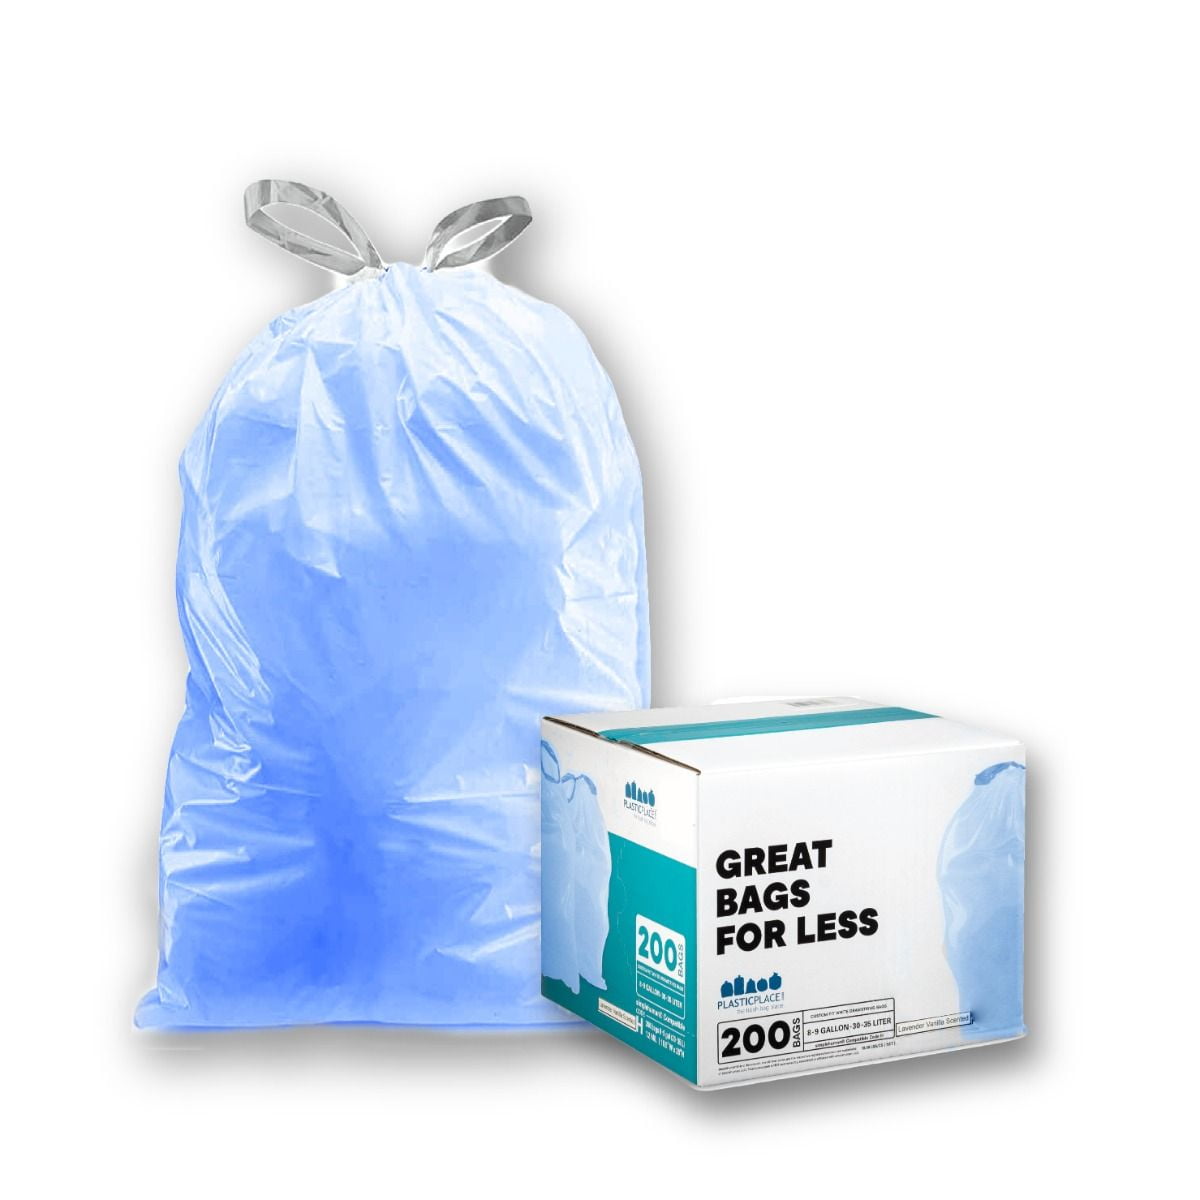  Plasticplace Trash Bags â”‚simplehuman (x) Code J Compatible  ”‚White Drawstring Garbage Liners 10-10.5 Gallon / 38-40 Liter â”‚ 21 x  28, 50 Count (Pack of 1) : Health & Household